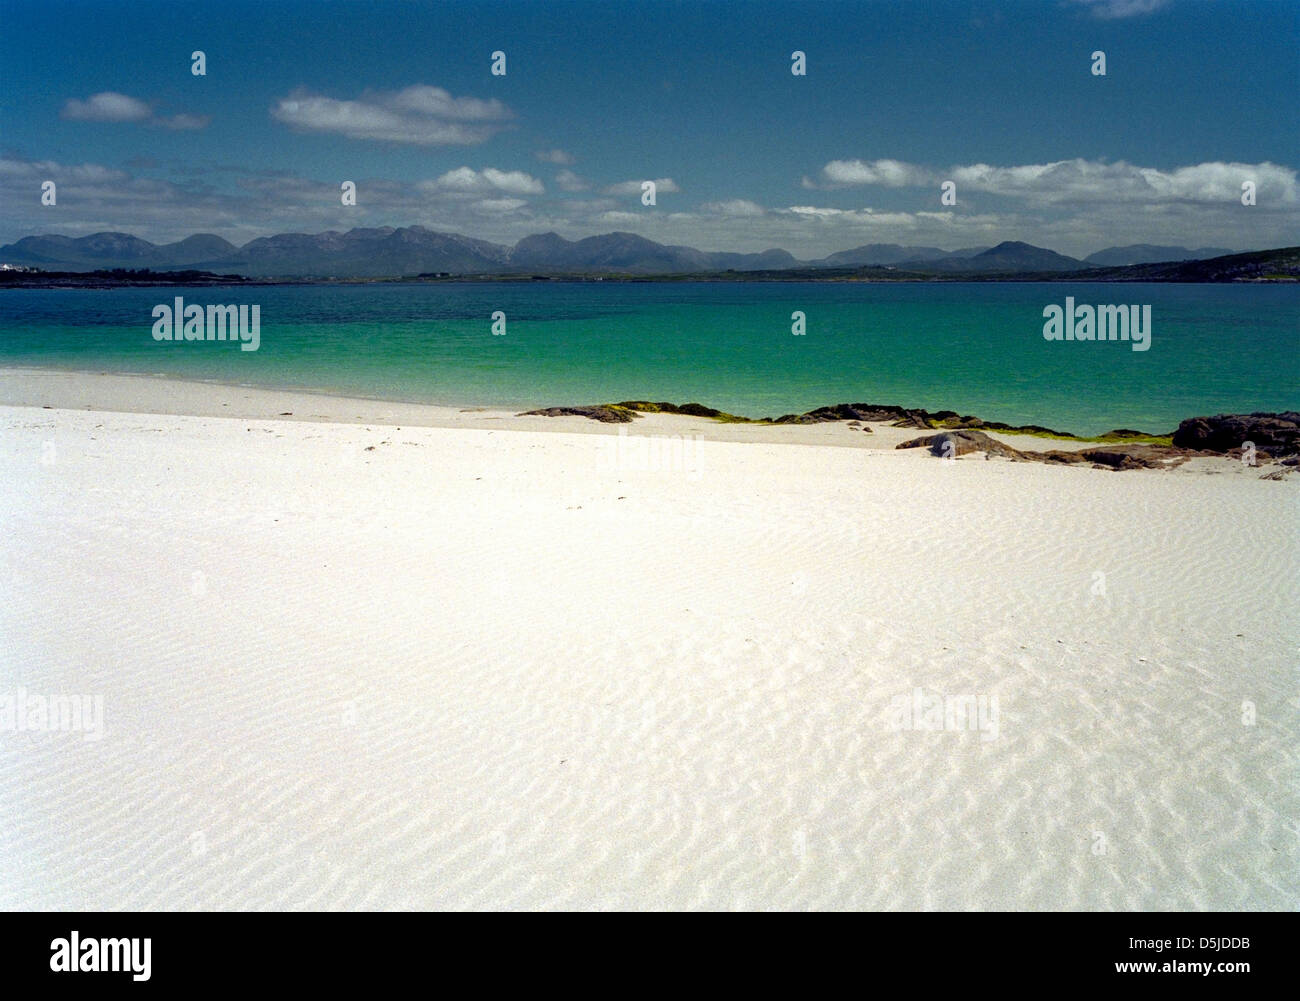 A beach of silver sand on the island of Inishlacken with the Twelve Bens in the background, Connemara, galway, Ireland Stock Photo